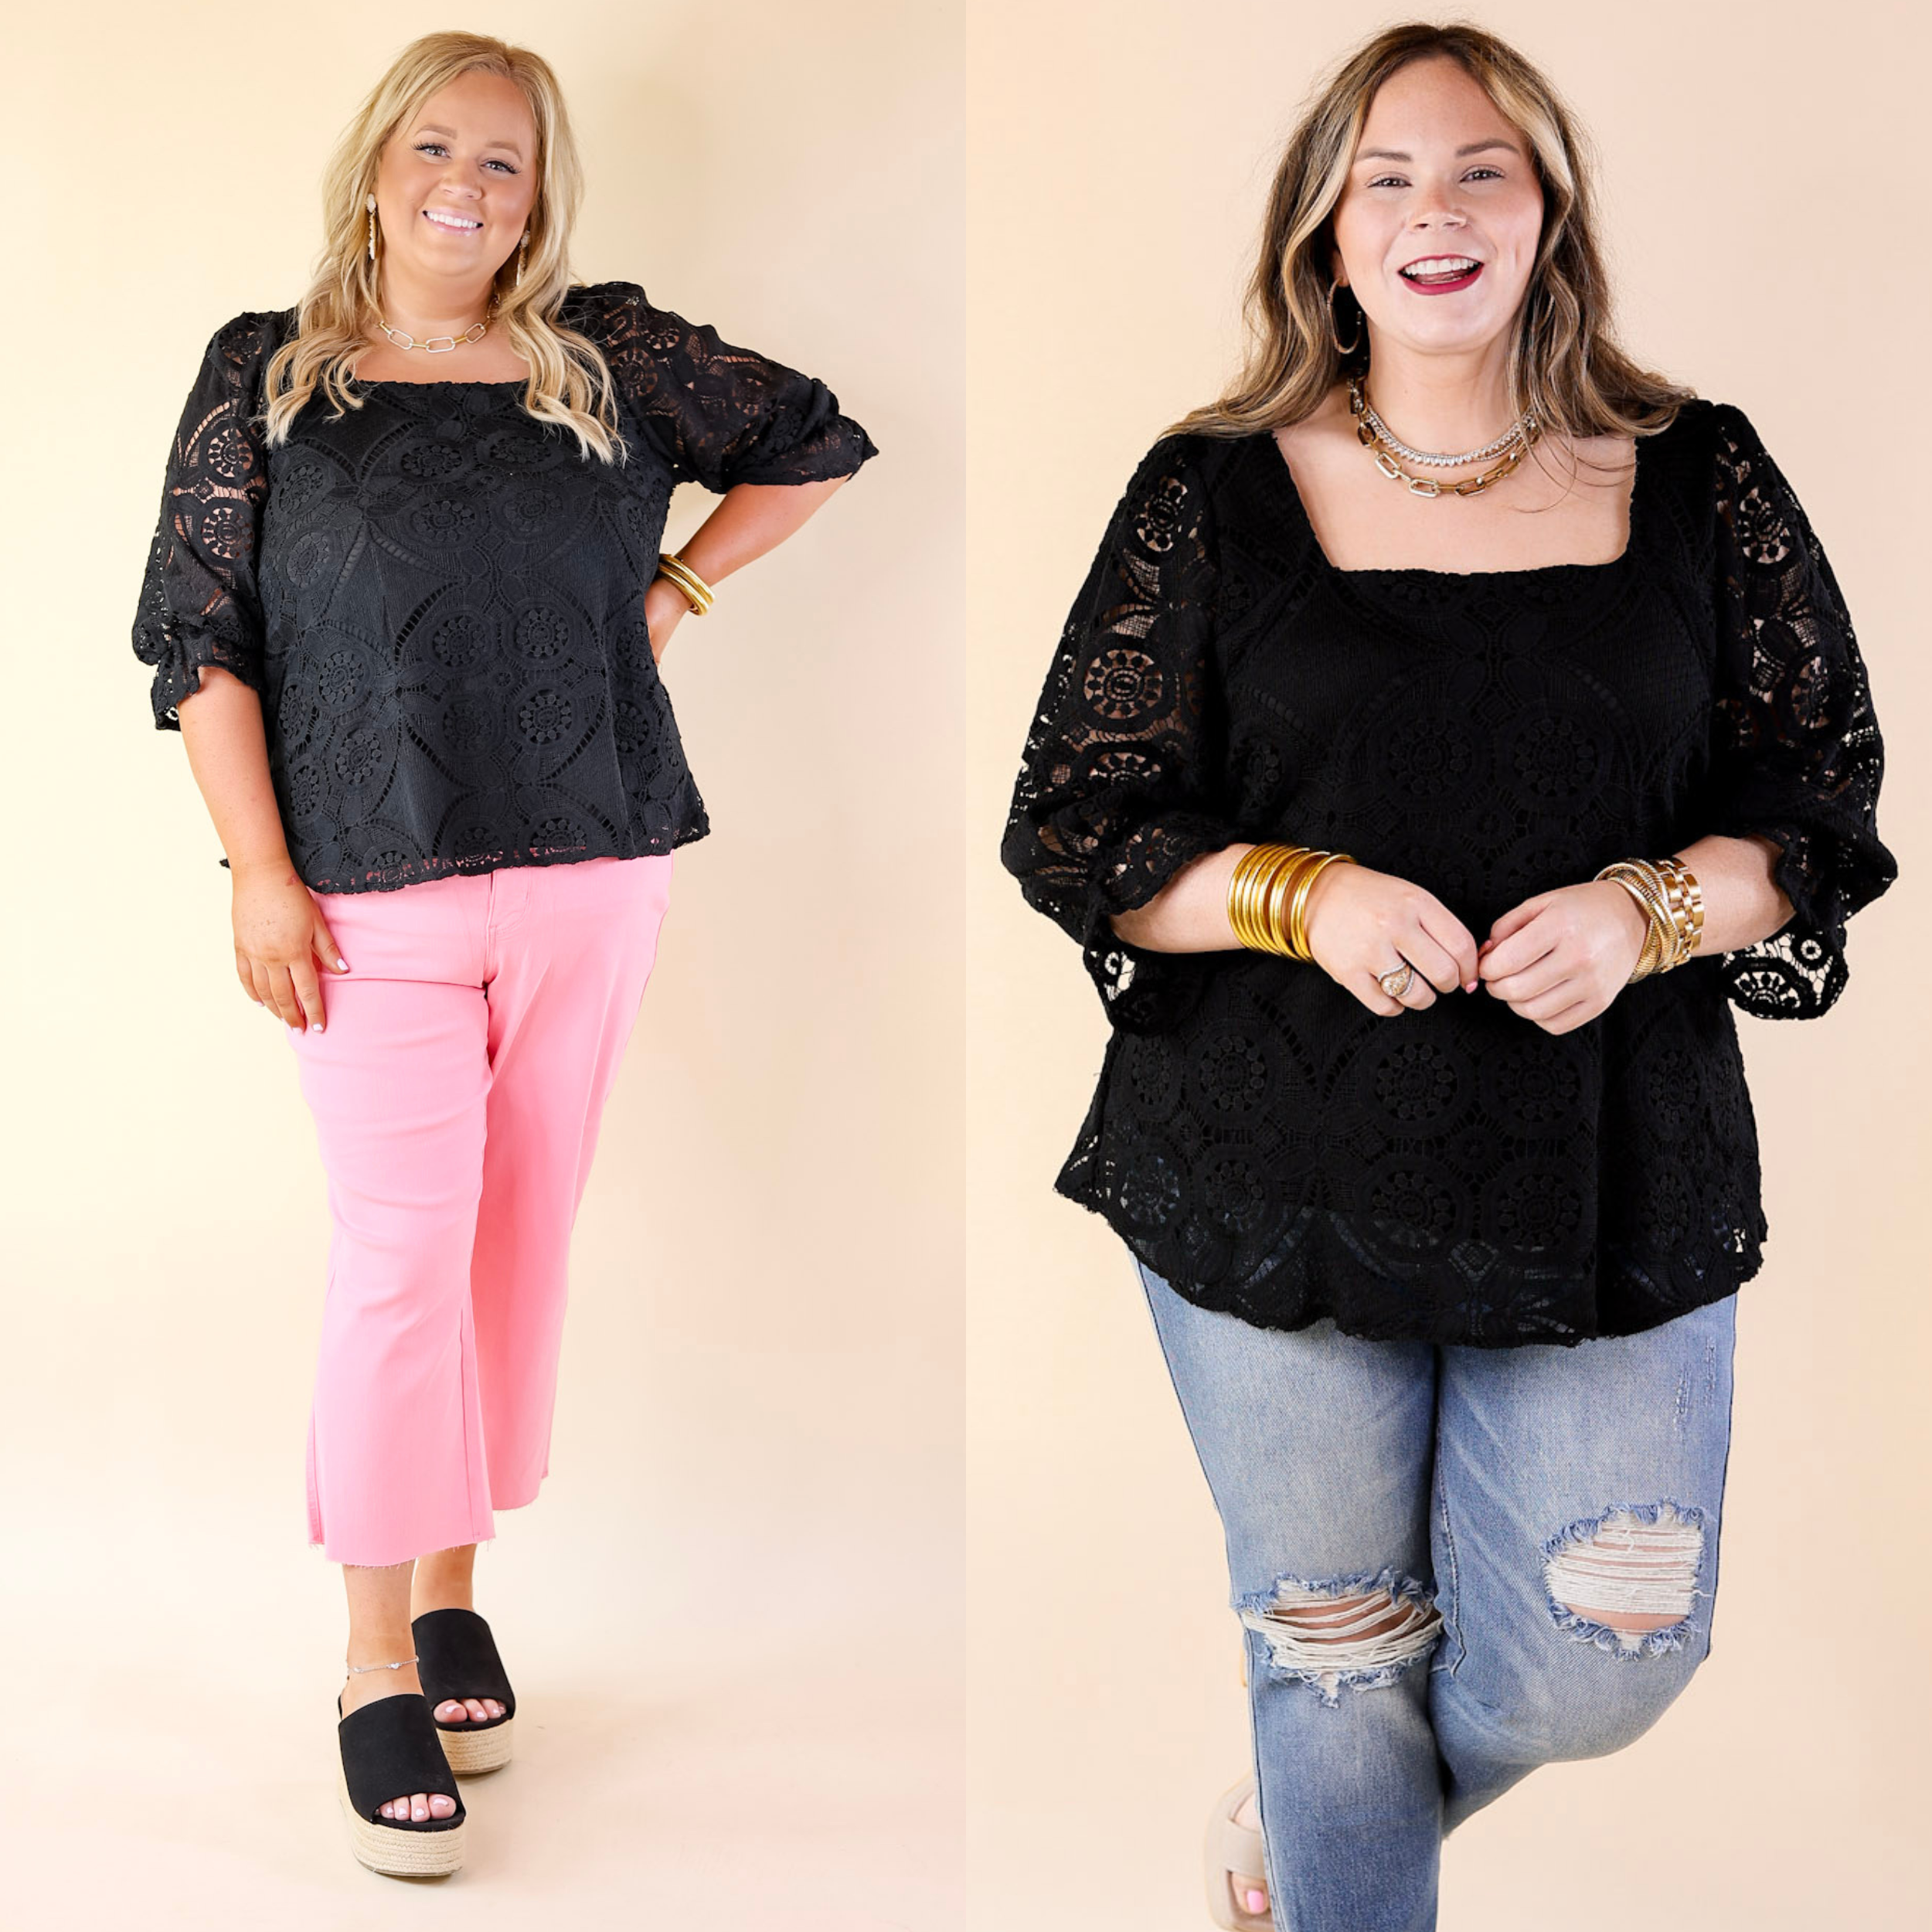 Sweet Talker 3/4 Sleeve Crocheted Top with Square Neckline in Black - Giddy Up Glamour Boutique